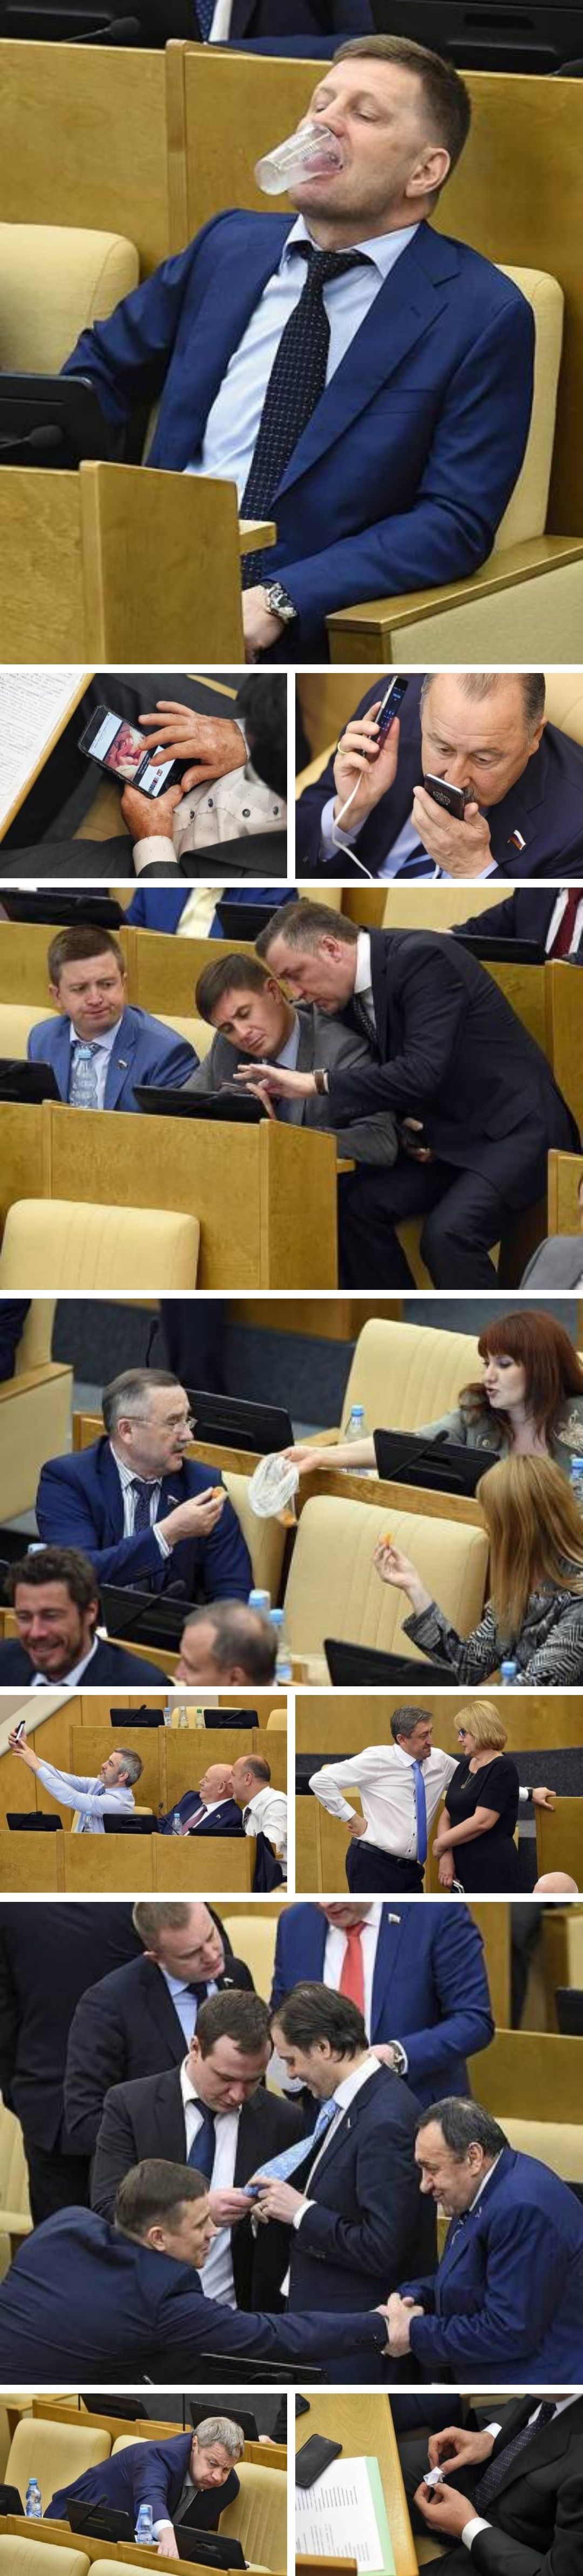 An average day in Russian parliament.